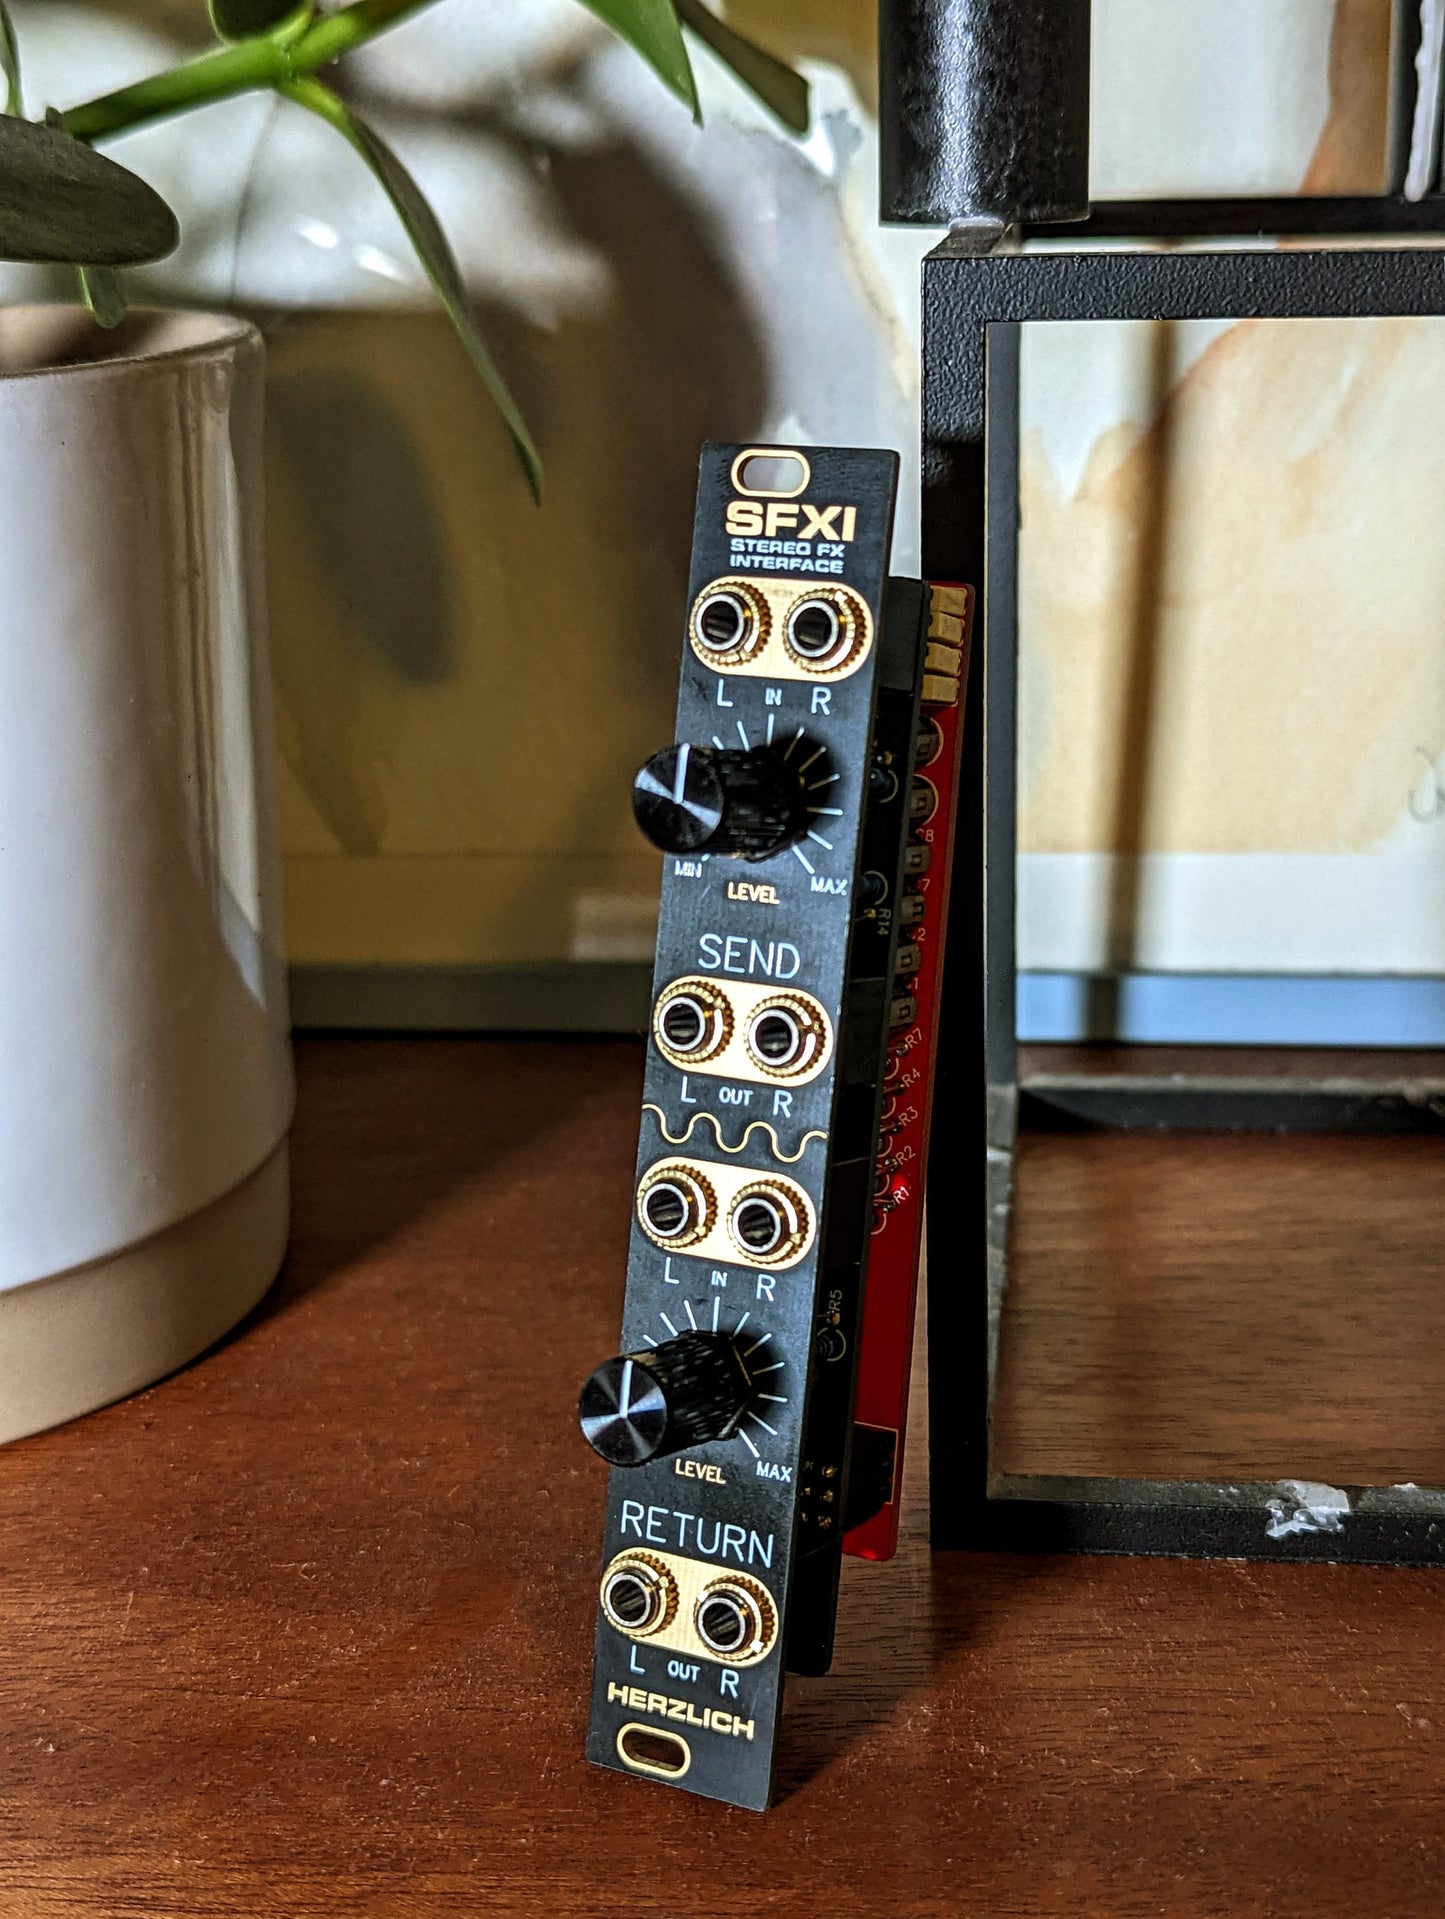 Herzlich SFXI - stereo FX adapter for Eurorack - integrate stereo FX pedals and rack effects in your modular setup - 4hp